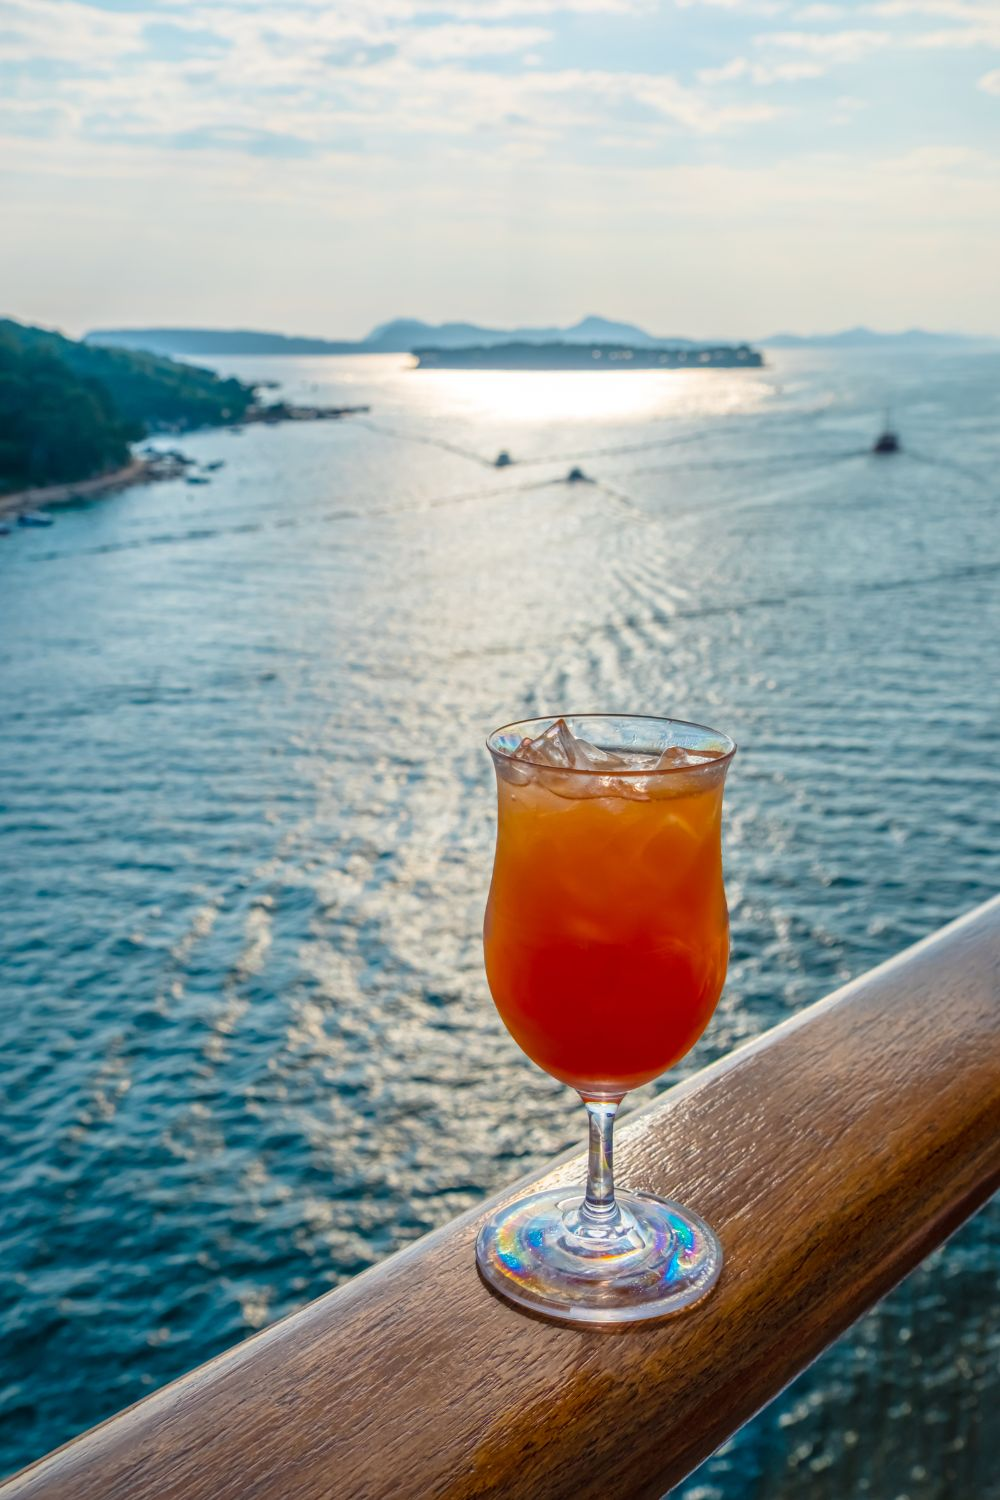 Image of a drink on a cruiship overlooking a harbor - Select drinks may be included on a carnival cruise